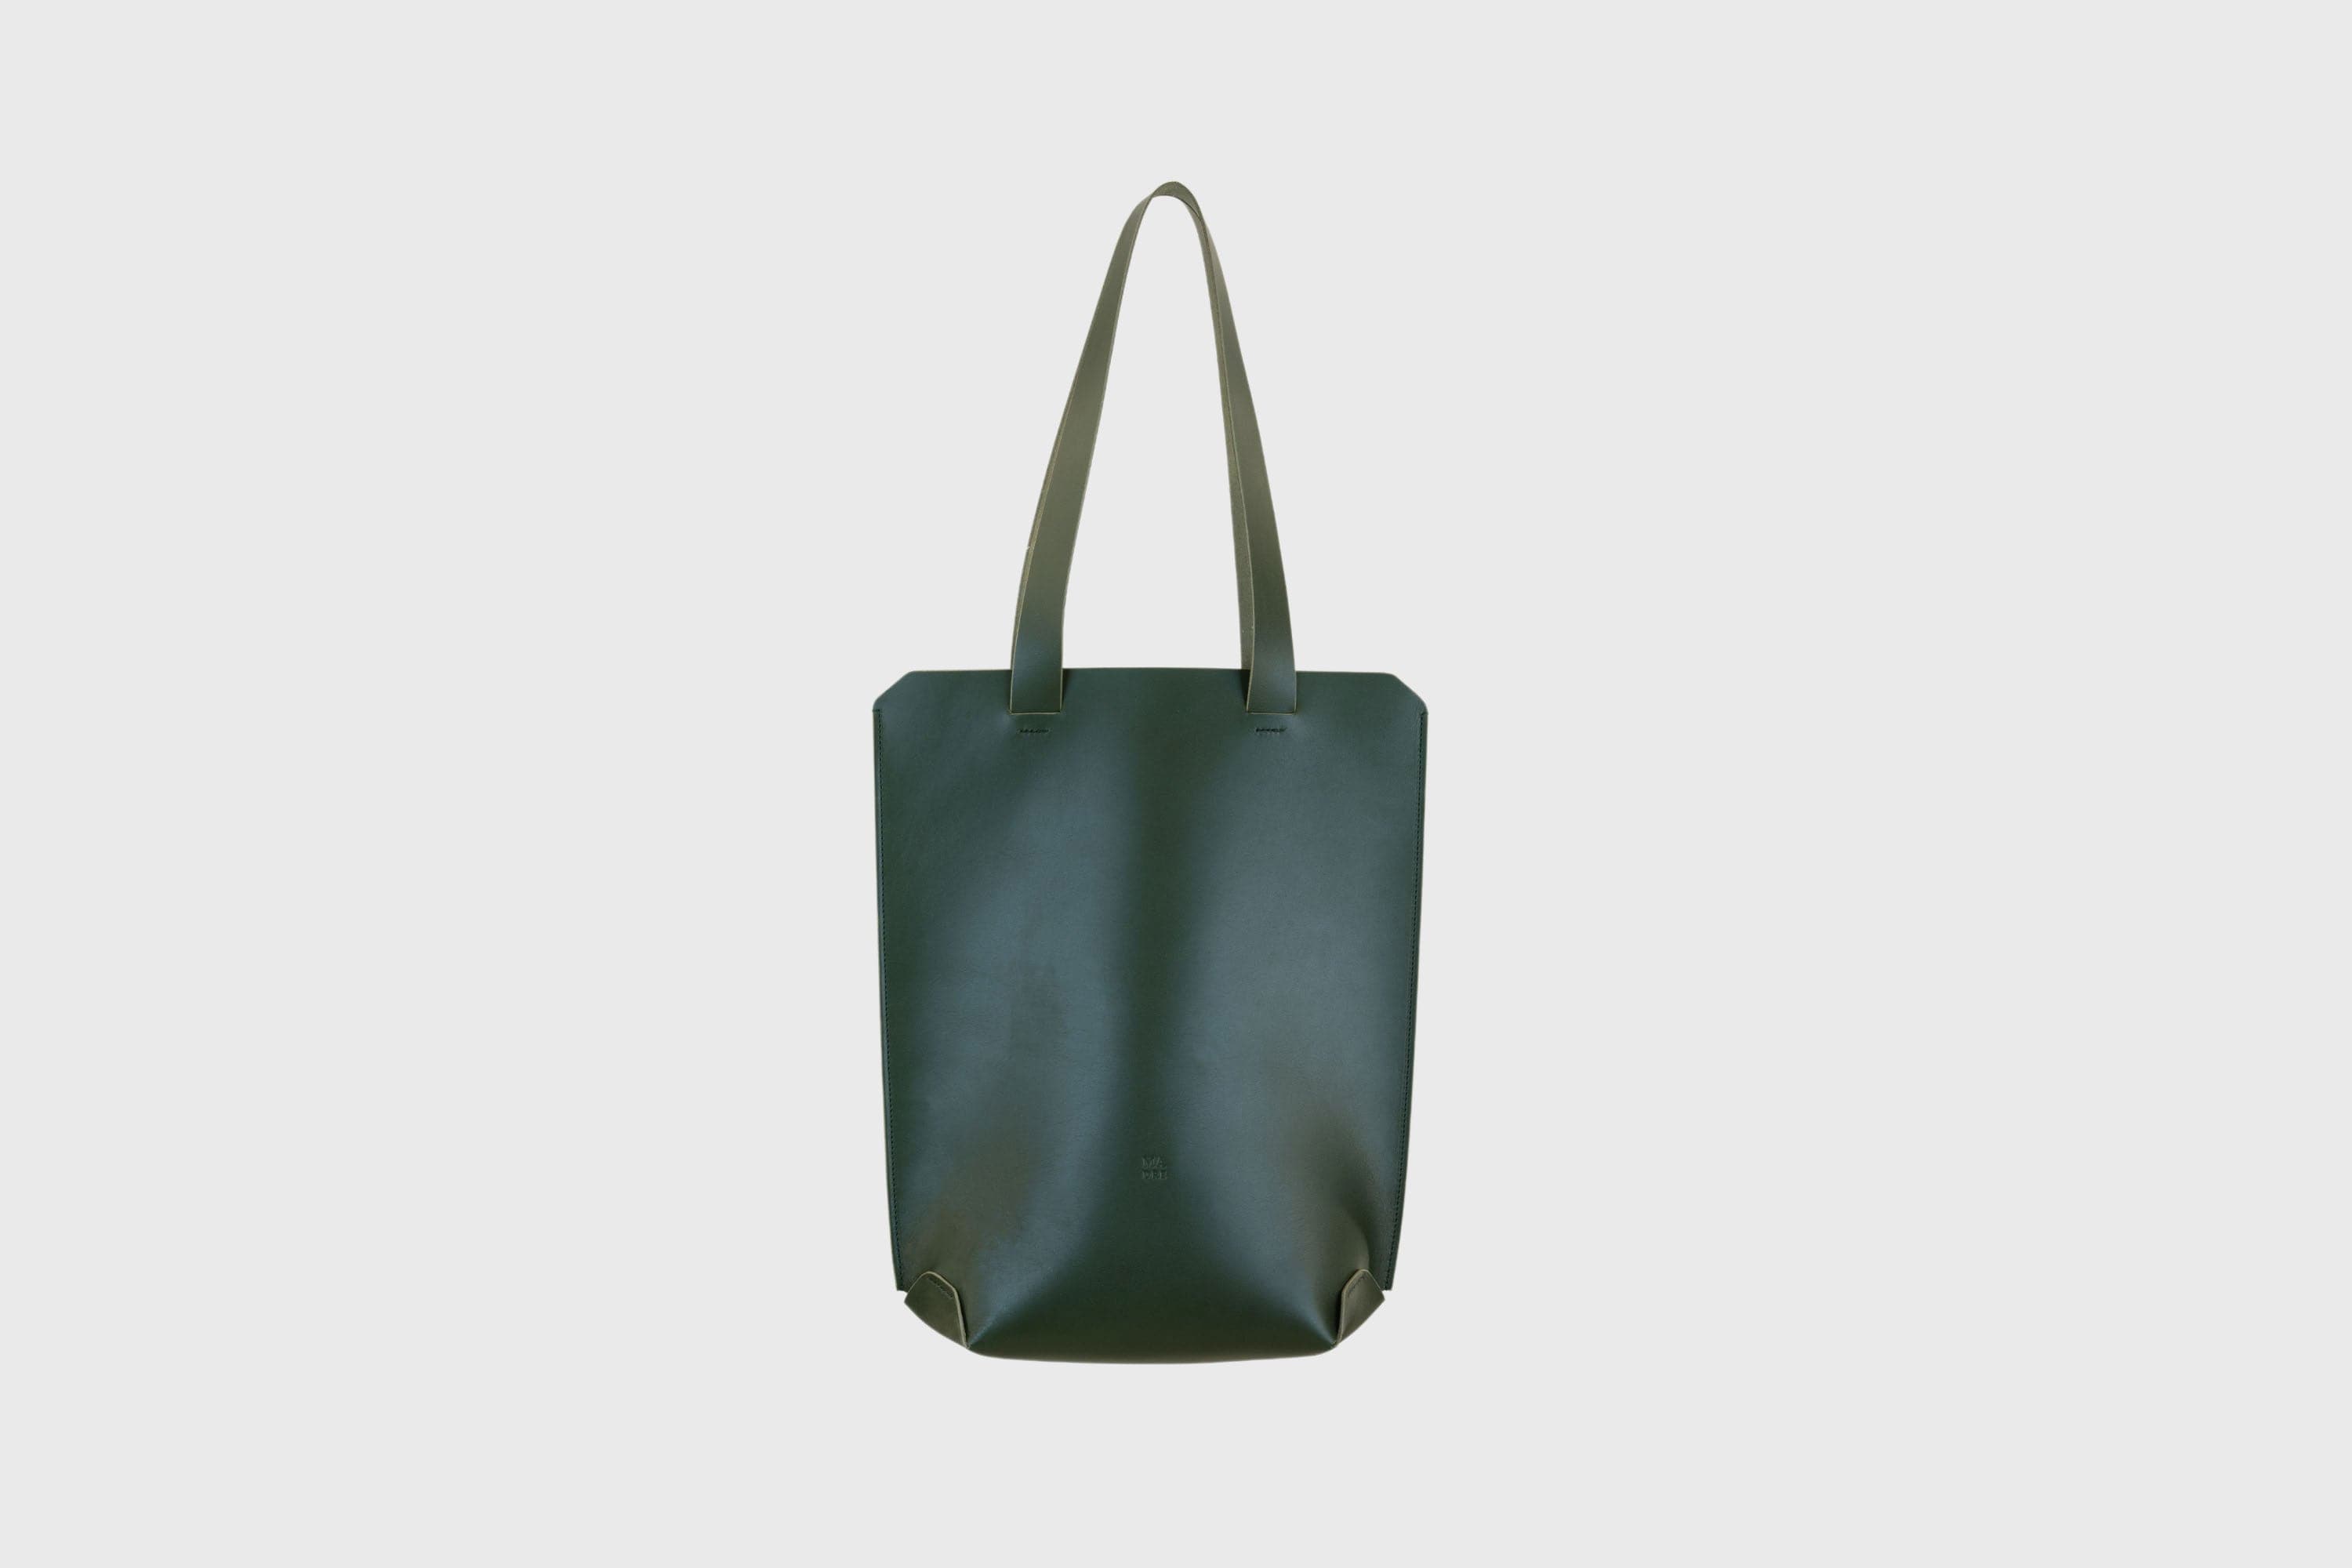 Tote Bag Olive Green Color Leather Frontal View Minimal Design By Manuel Dreesmann Atelier Madre Barcelona Spain